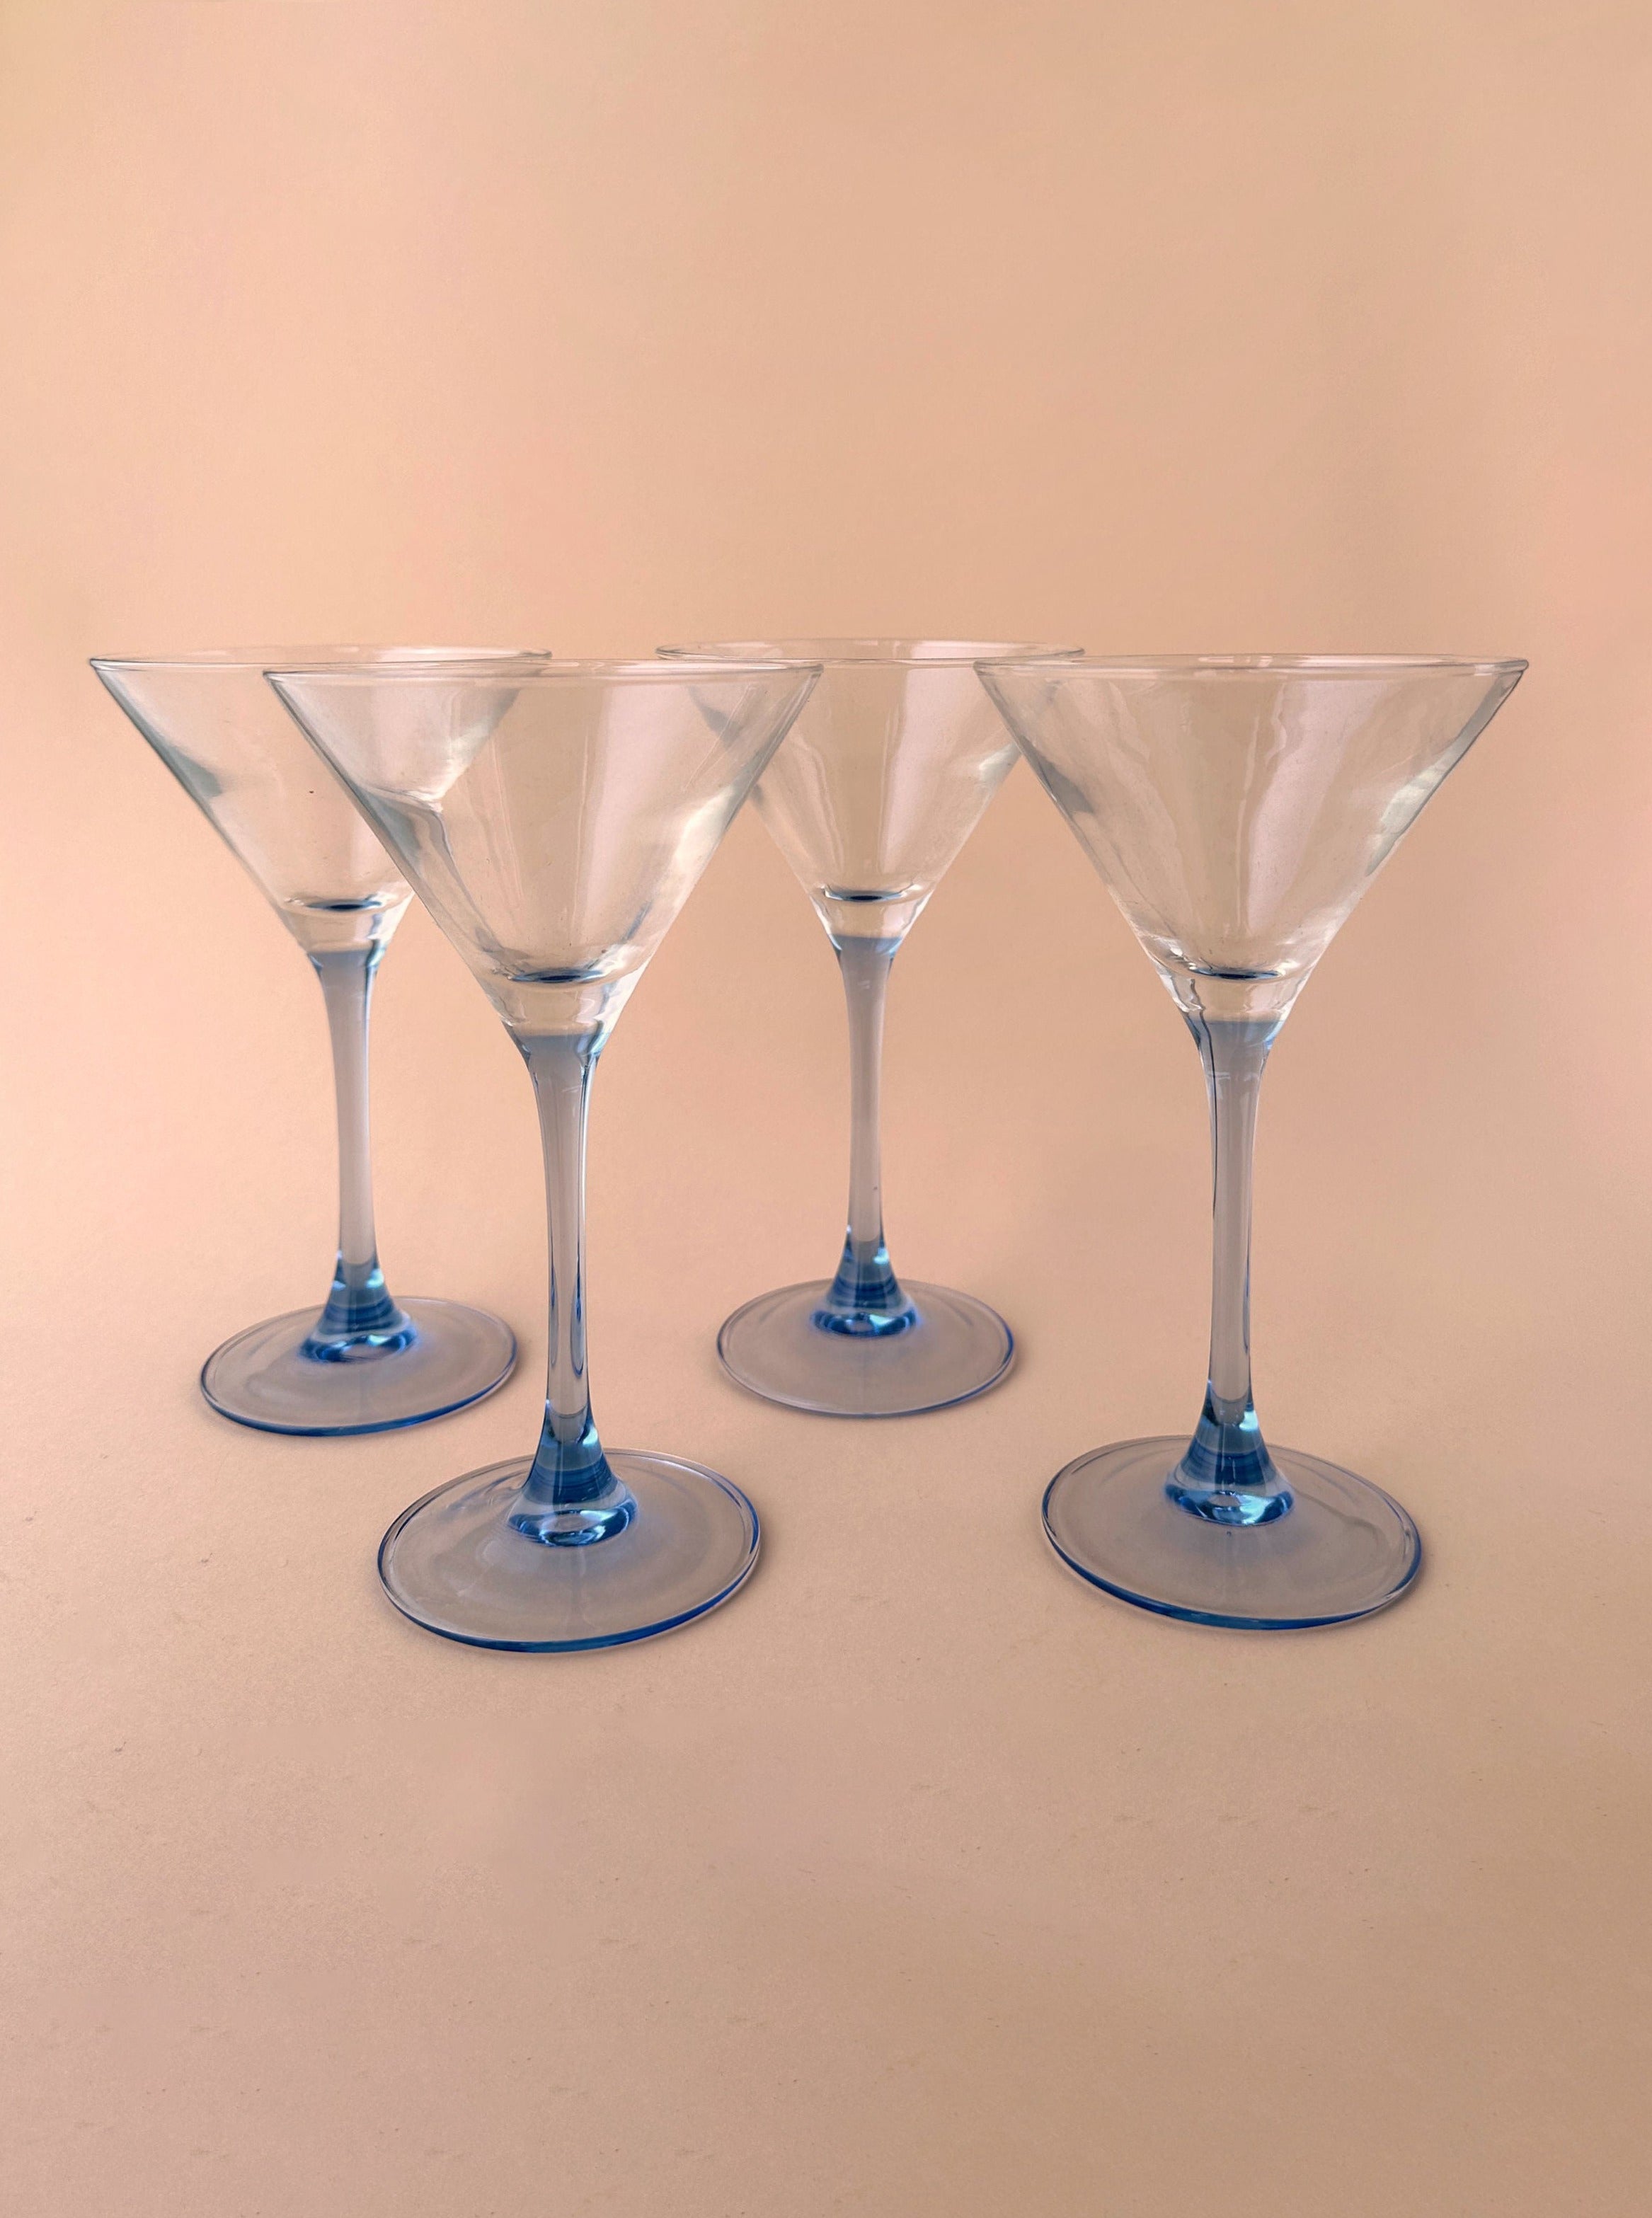 Godinger Martini Glasses, Coupe Cocktail Glasses, European Martini Glass  Cocktail Glass Set of 4, Blue, 6oz - Made in Europe…